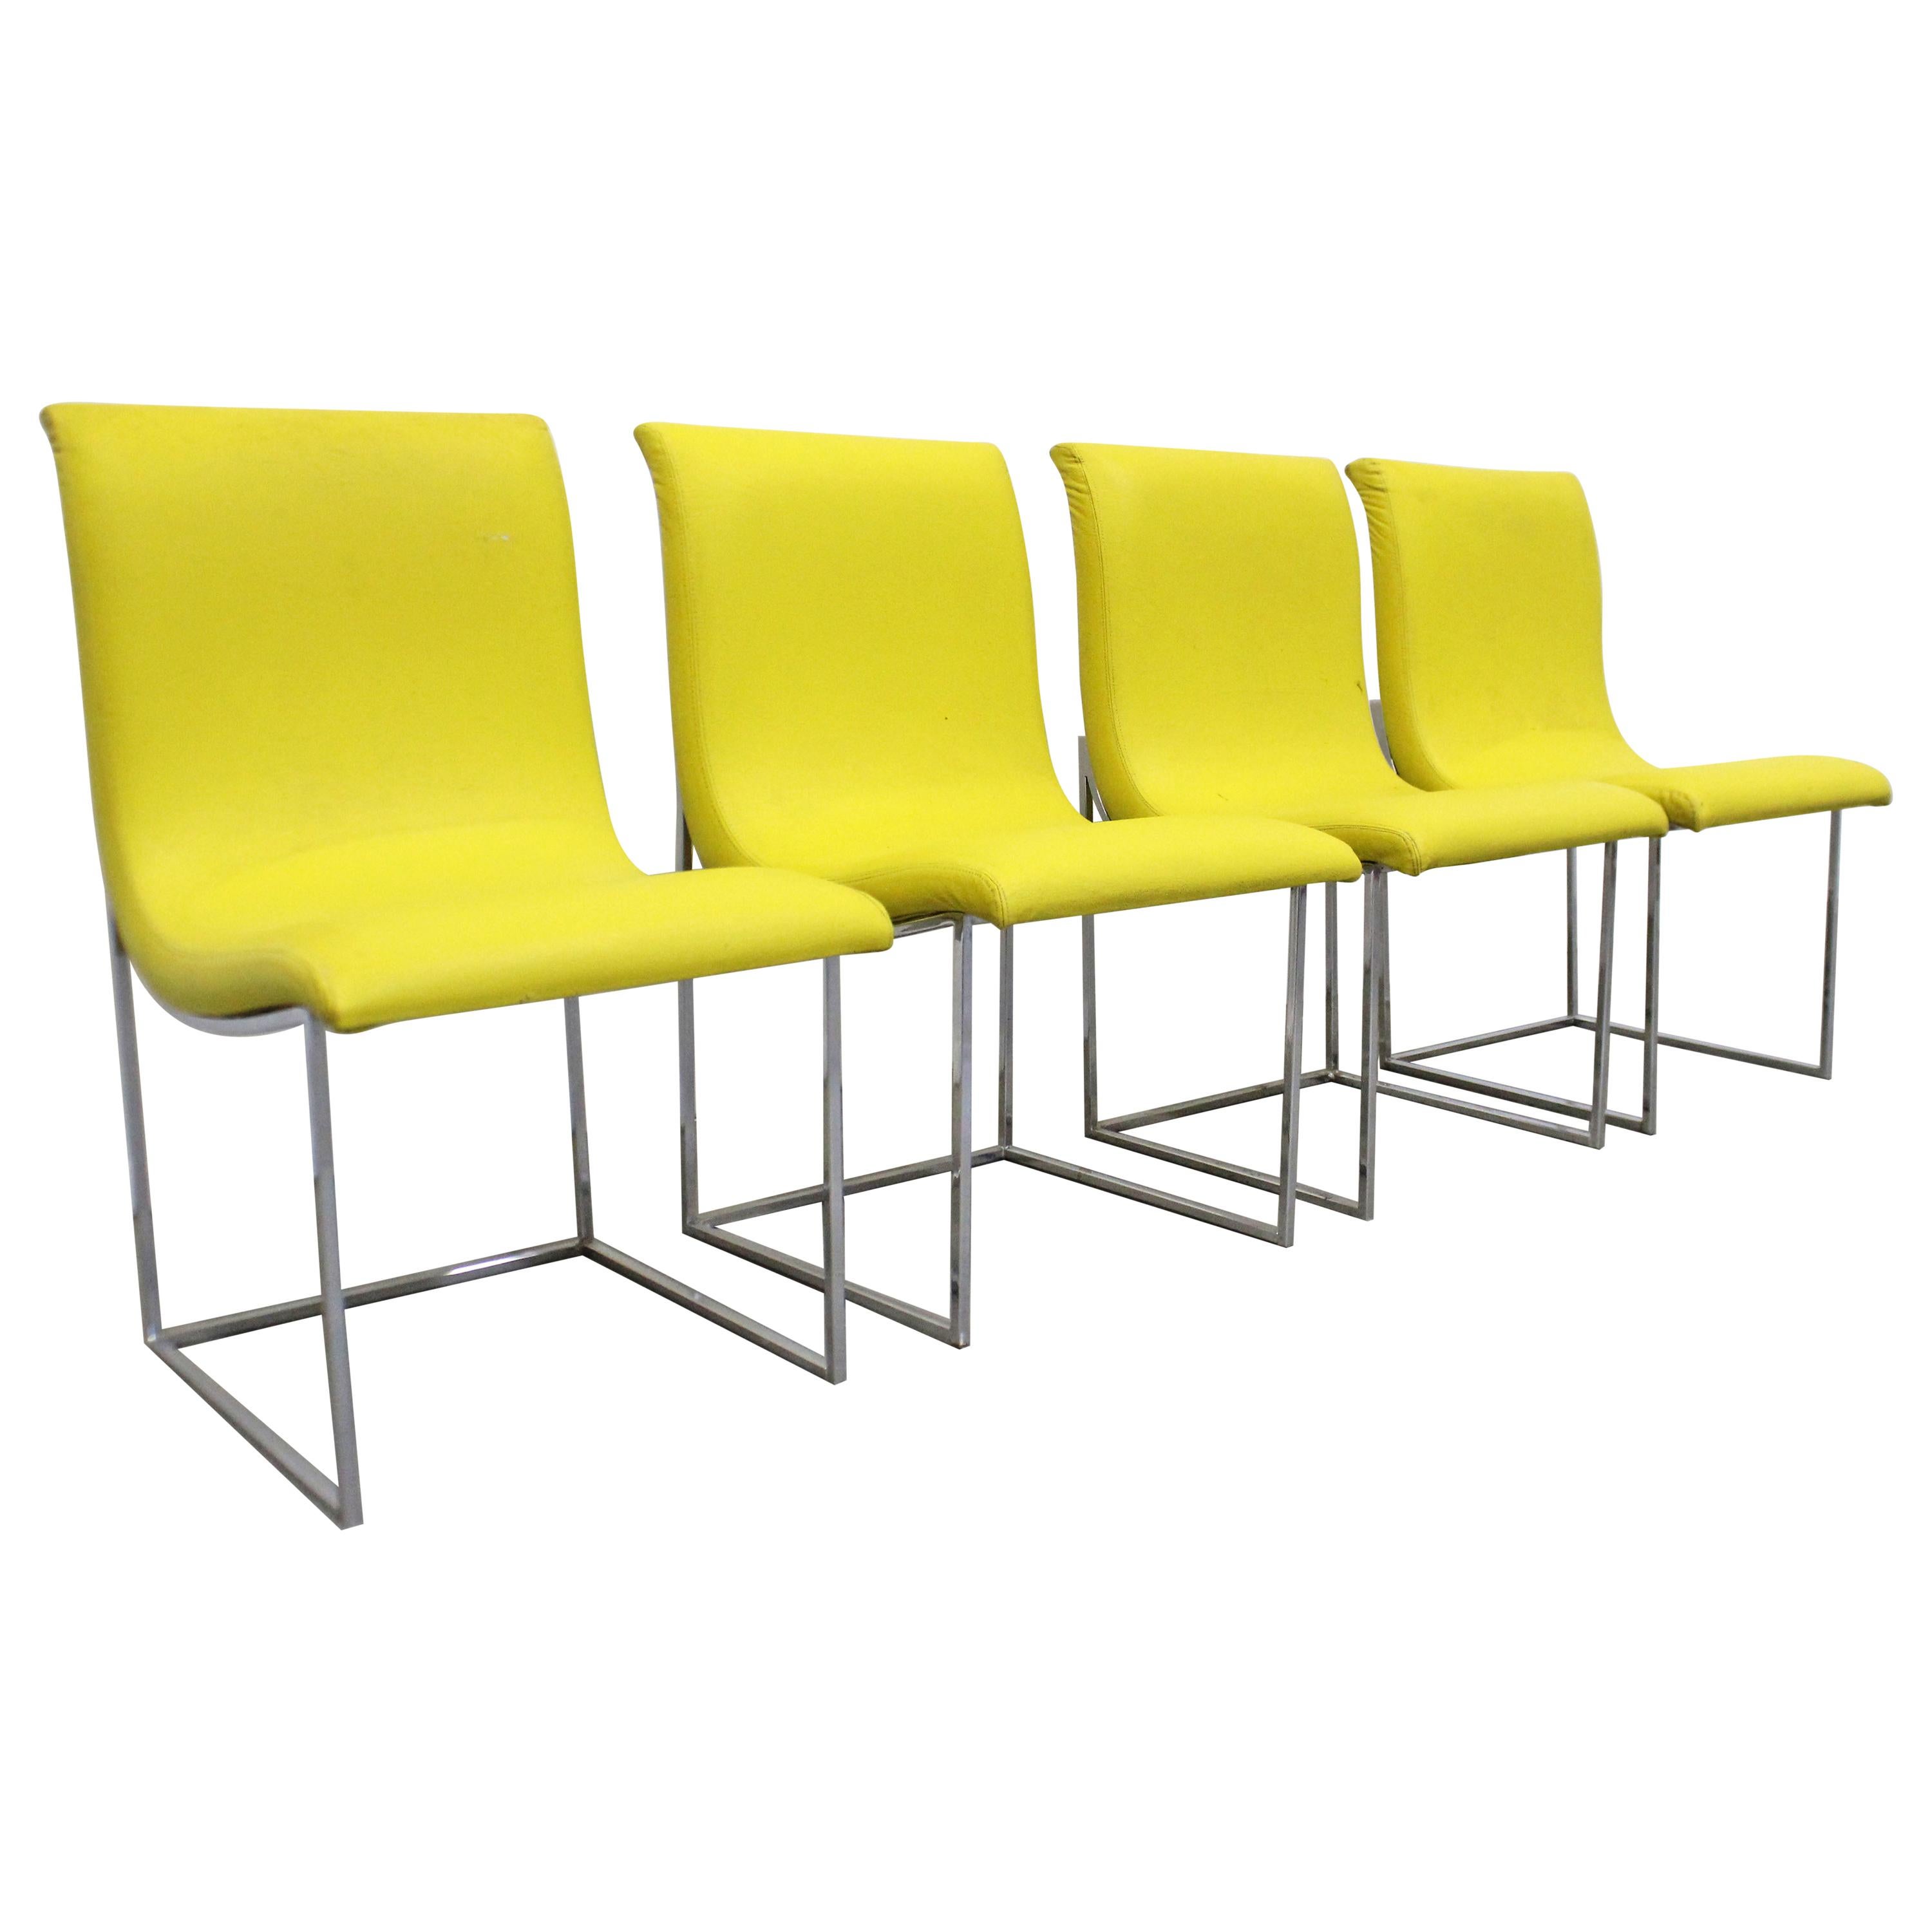 Set of 4 Mid-Century Modern Milo Baughman for Thayer Coggin Chrome Dining Chairs For Sale